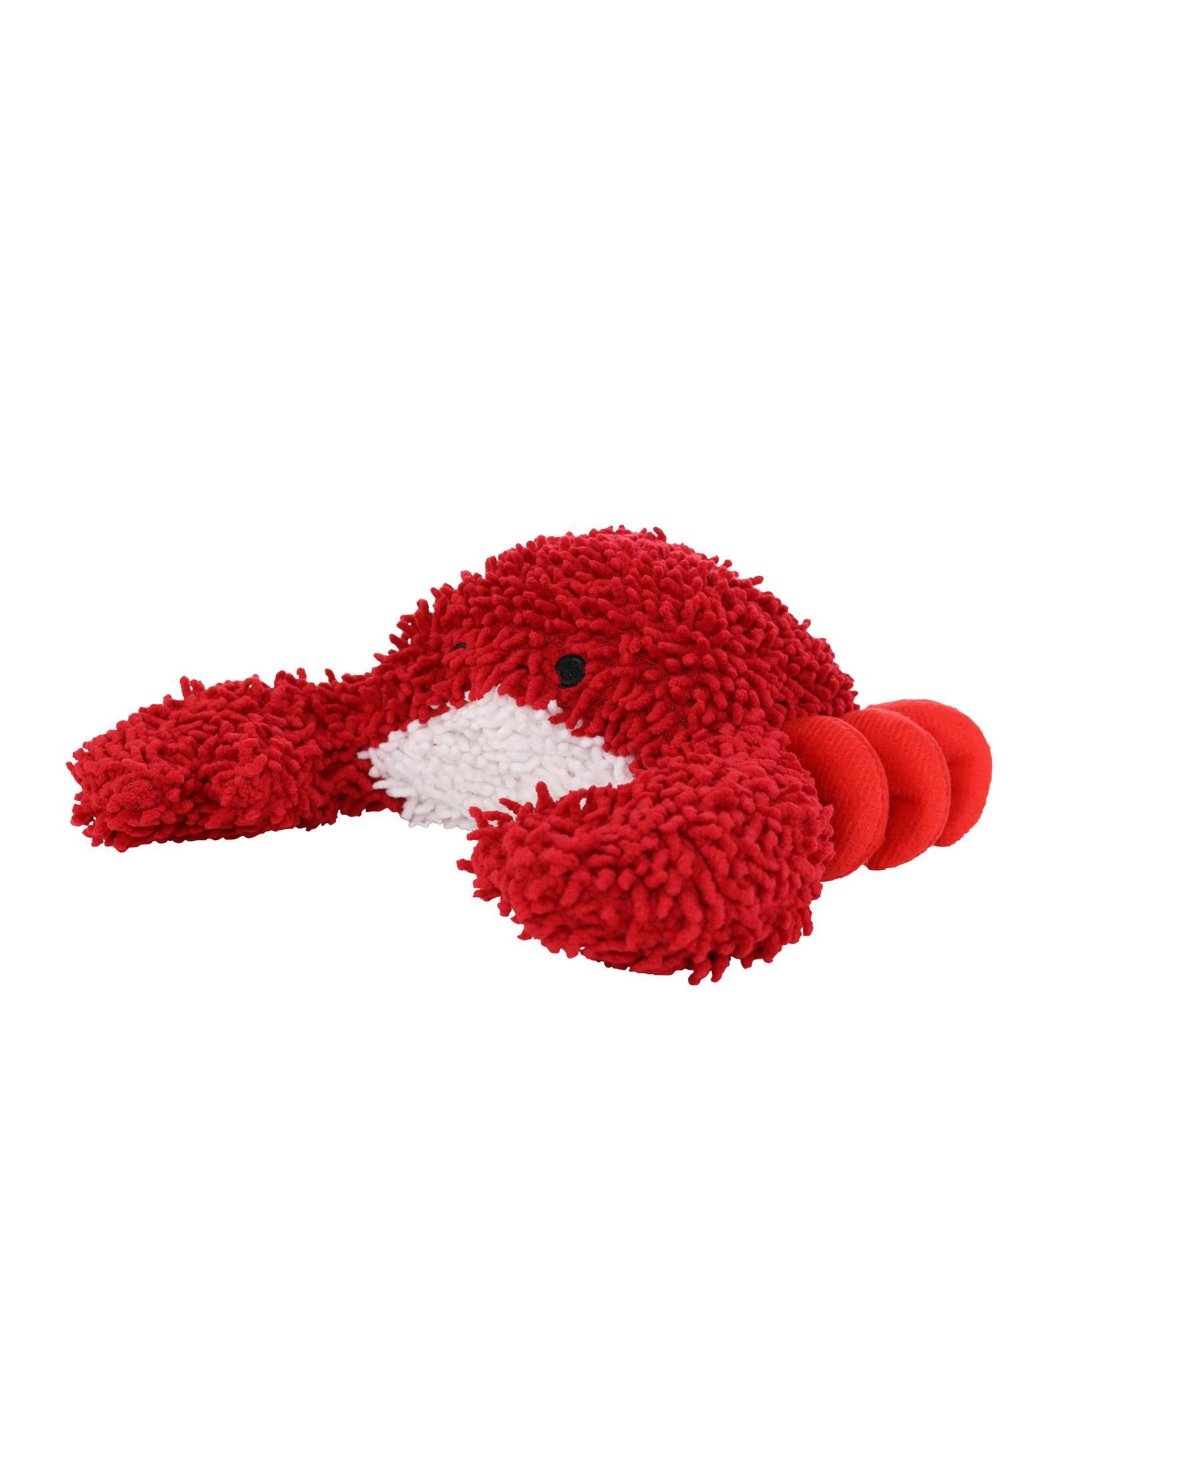 Microfiber Ball Med Crab Squeaker Dog Toy - Red